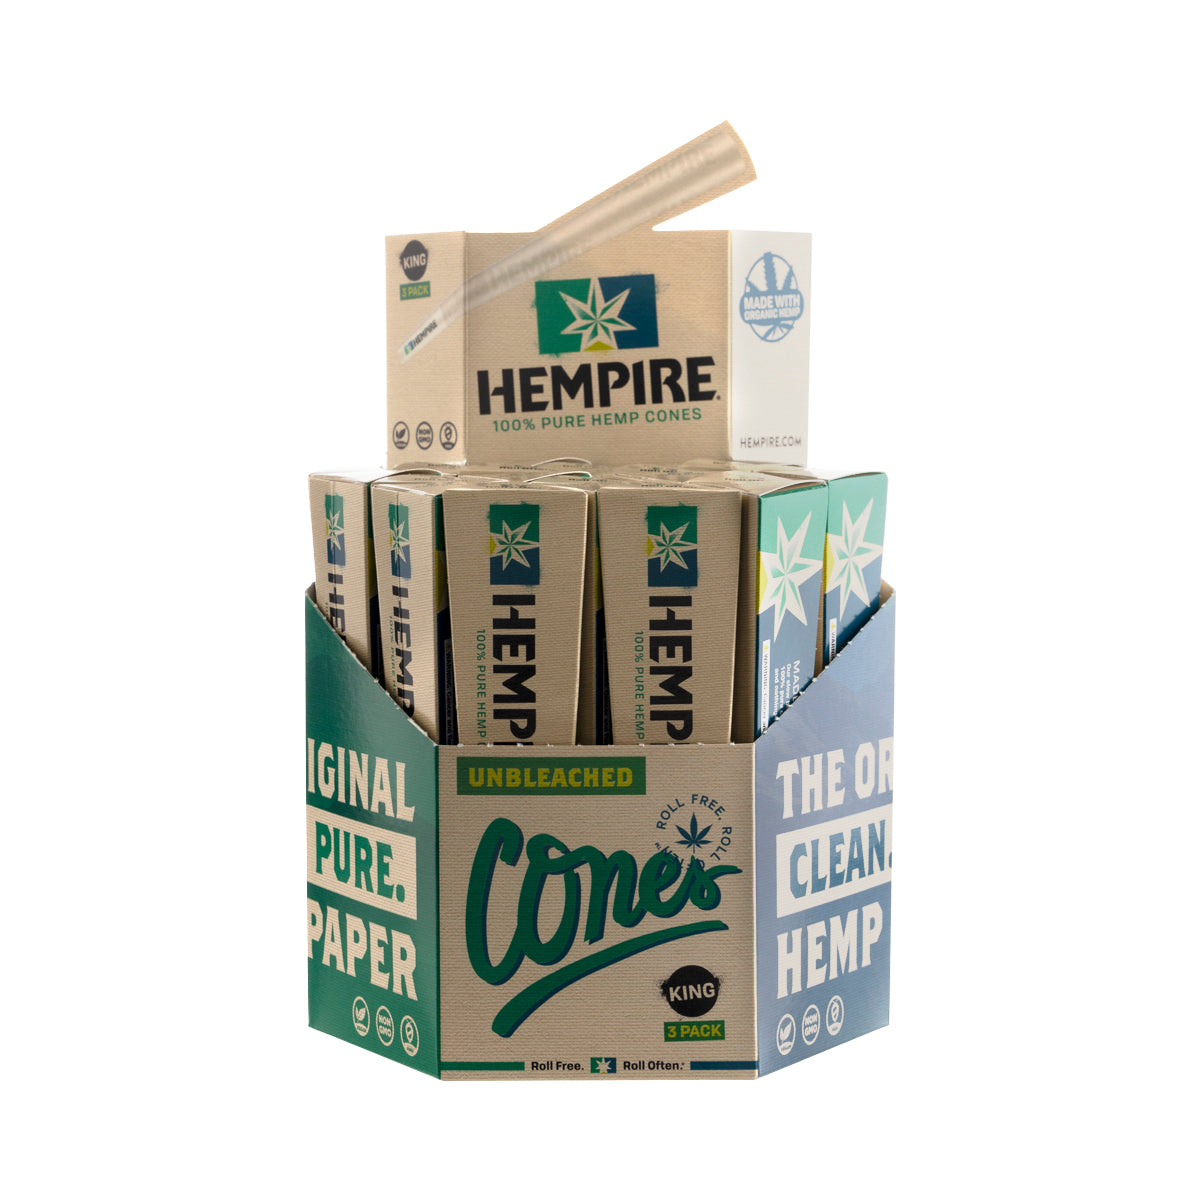 HEMPIRE UNBLEACHED CONES KING SIZE - 3/24 CT